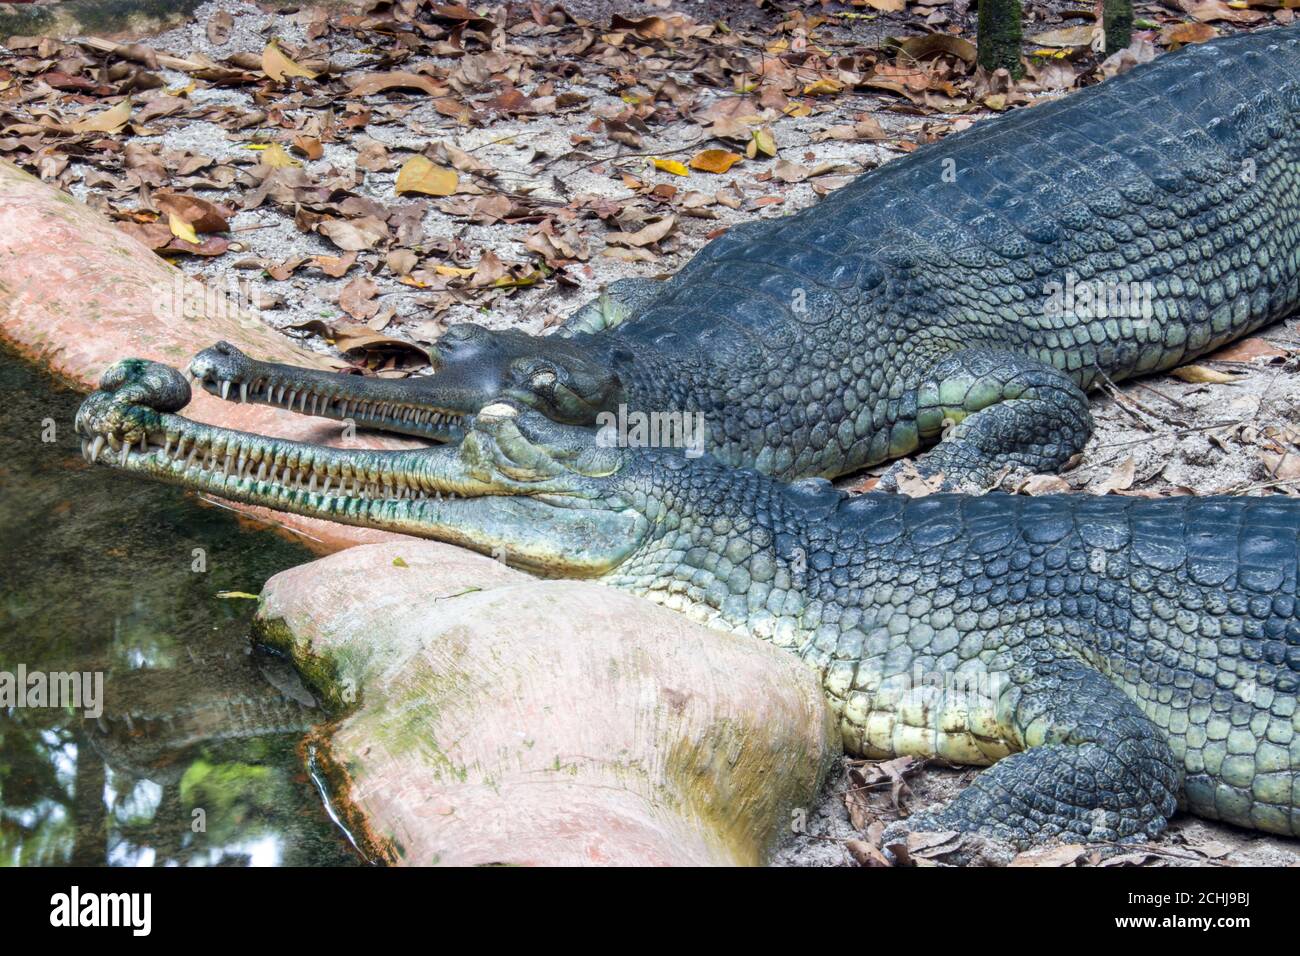 The gharial (Gavialis gangeticus) rests by the pond. It is a crocodilian in the family Gavialidae, native to sandy freshwater river banks. Stock Photo